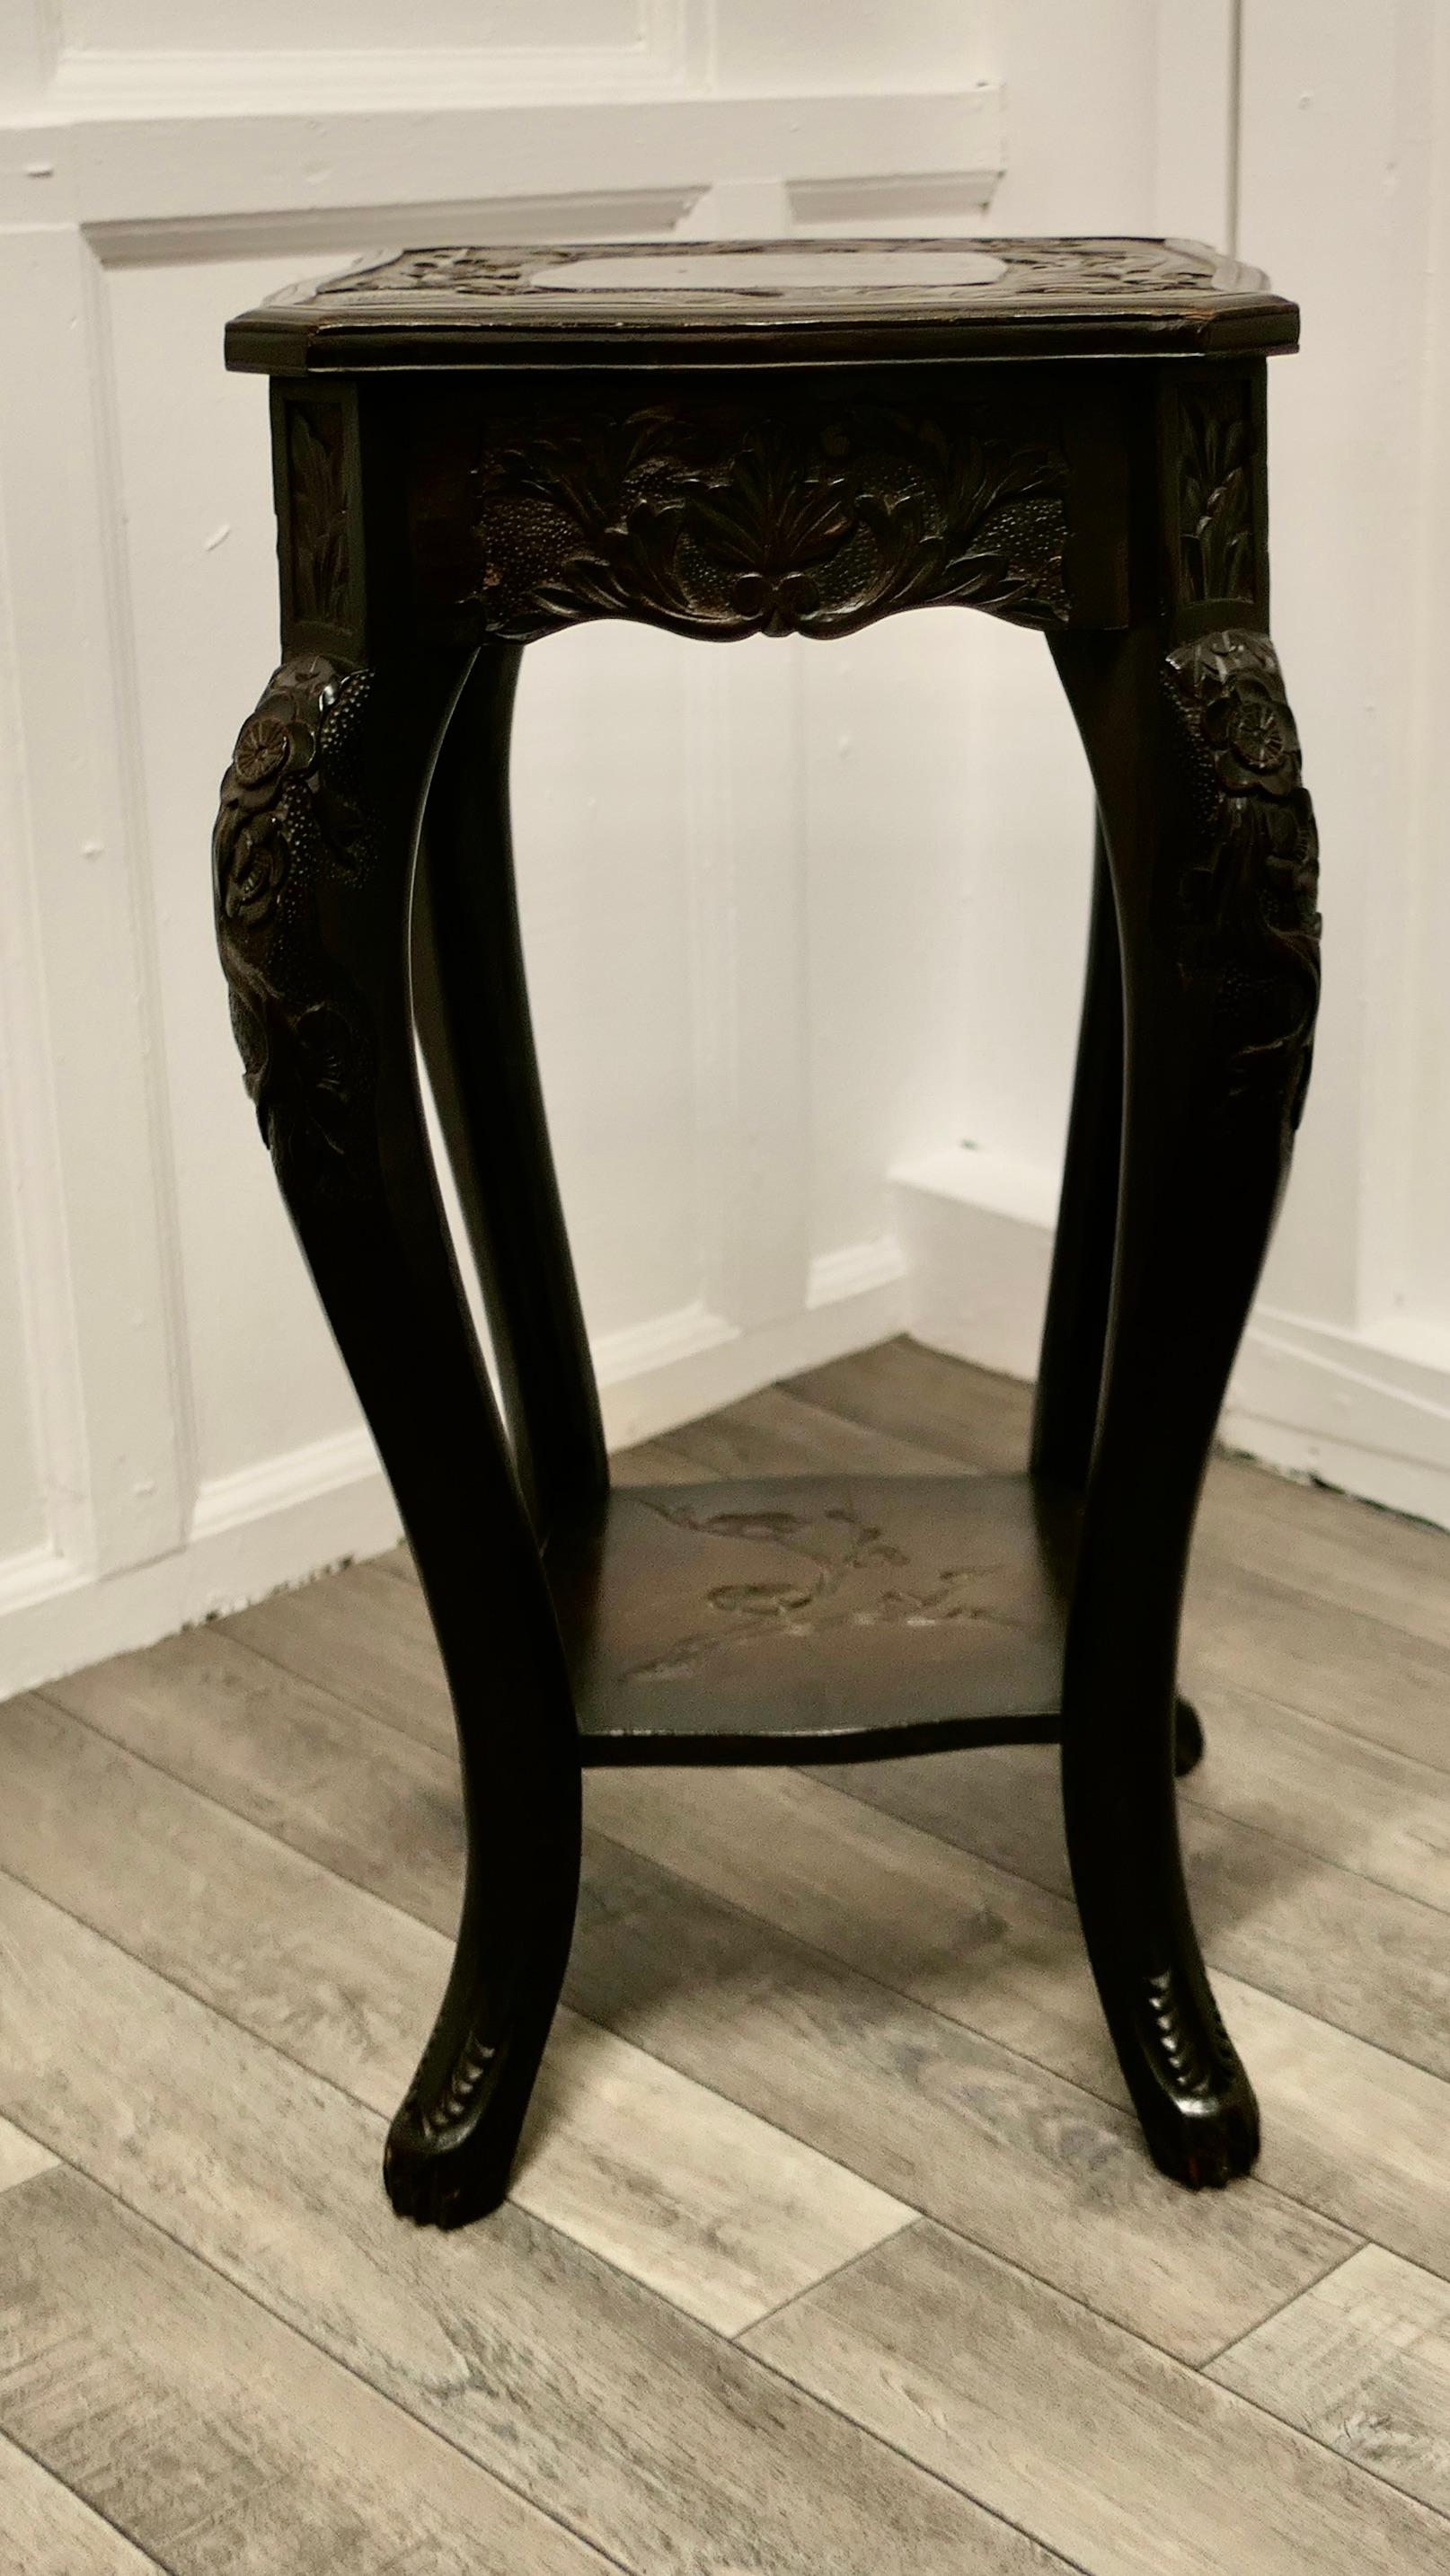 A Japanese carved lamp table

The square top has a plain centre panel the border is beautifully carved with leaves and it is set on bowed deeply carved cabriole style legs.
The table has an under tier shelf which is also carved, this in a more